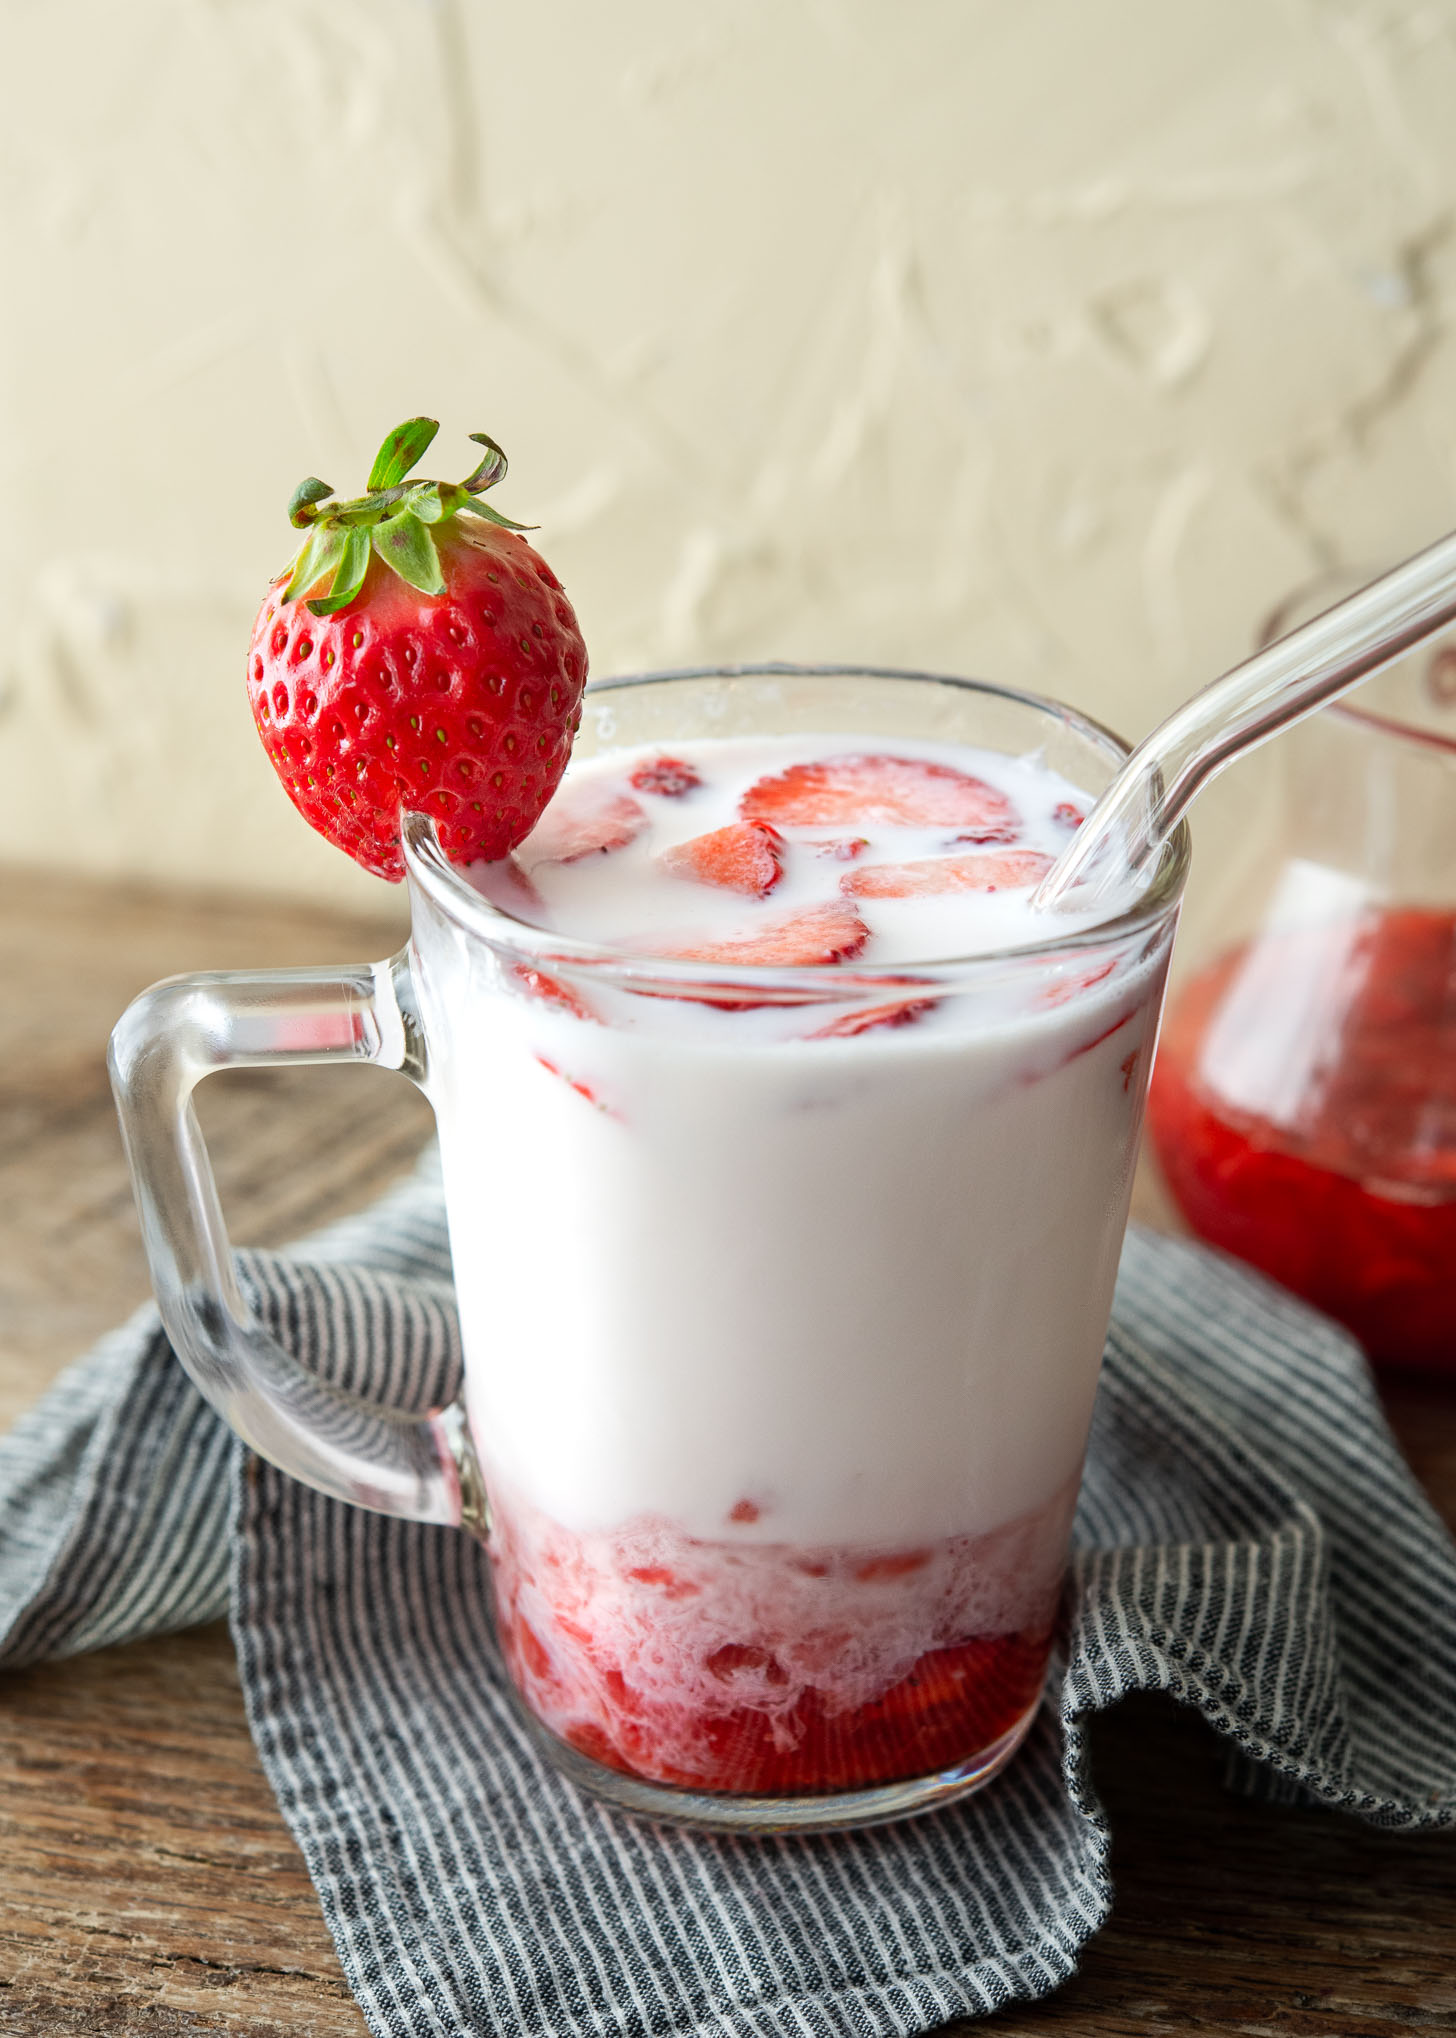 Milk and fresh strawberry syrup marbled together in a glass cup.